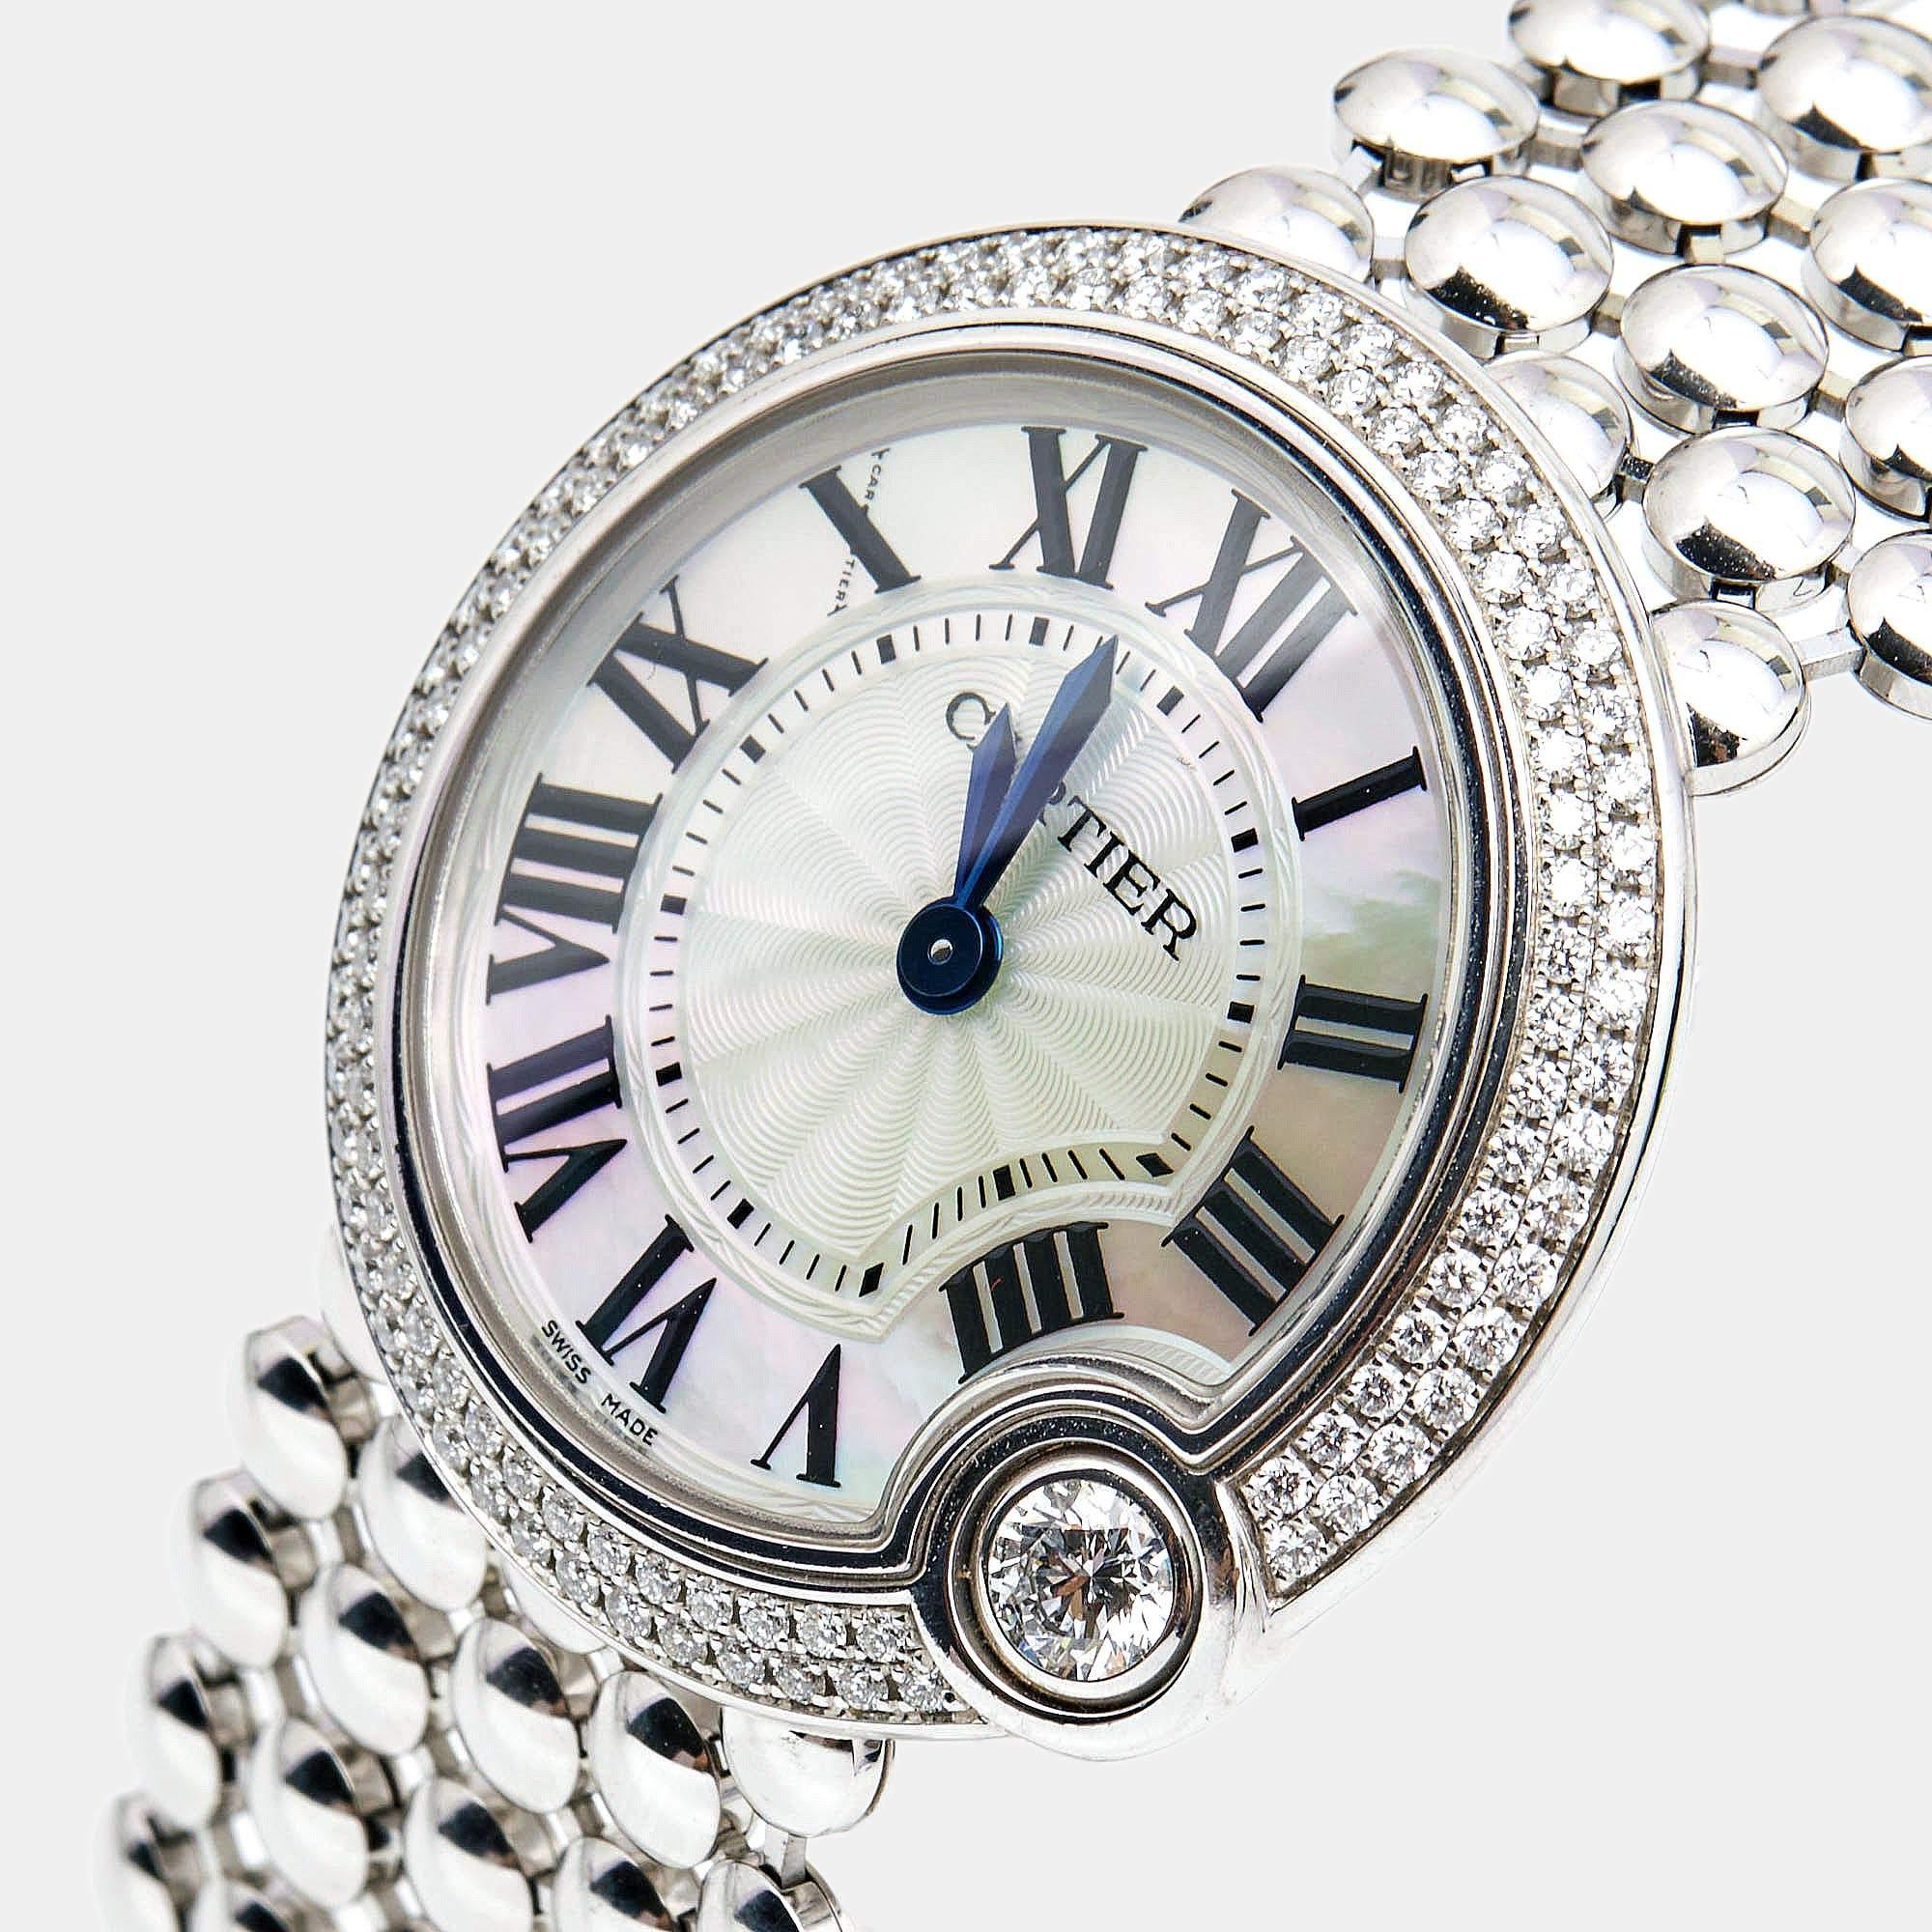 Cartier's expertise and love for creativity, as well as fine artistry, are evident in this Ballon Blanc de Cartier watch. It would be fair to call it exquisite. One can see the harmonious fusion of the brand's love for signature details from every